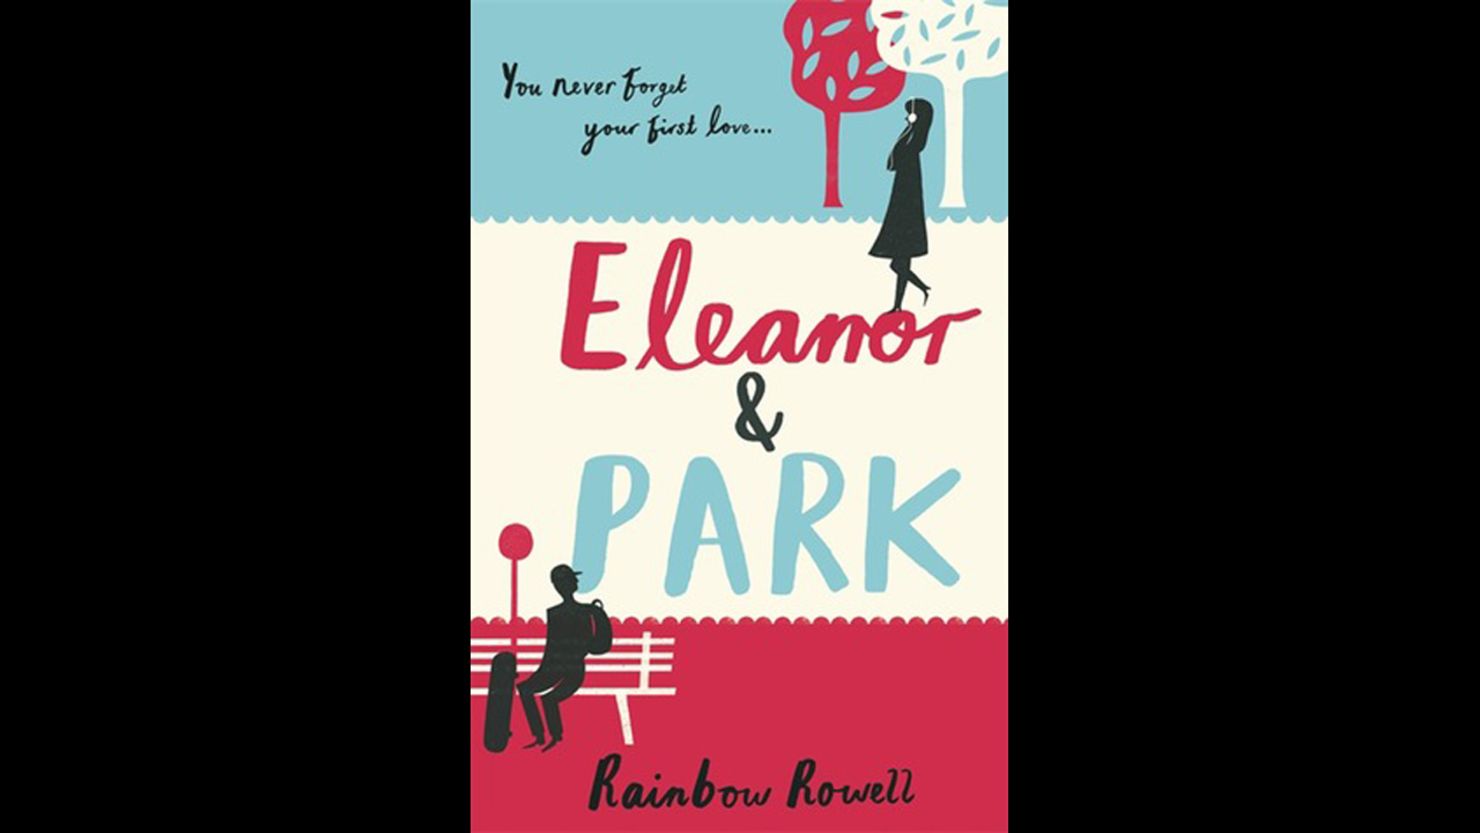 DreamWorks Studios has acquired movie rights to Rainbow Rowell's best-selling novel "Eleanor & Park."